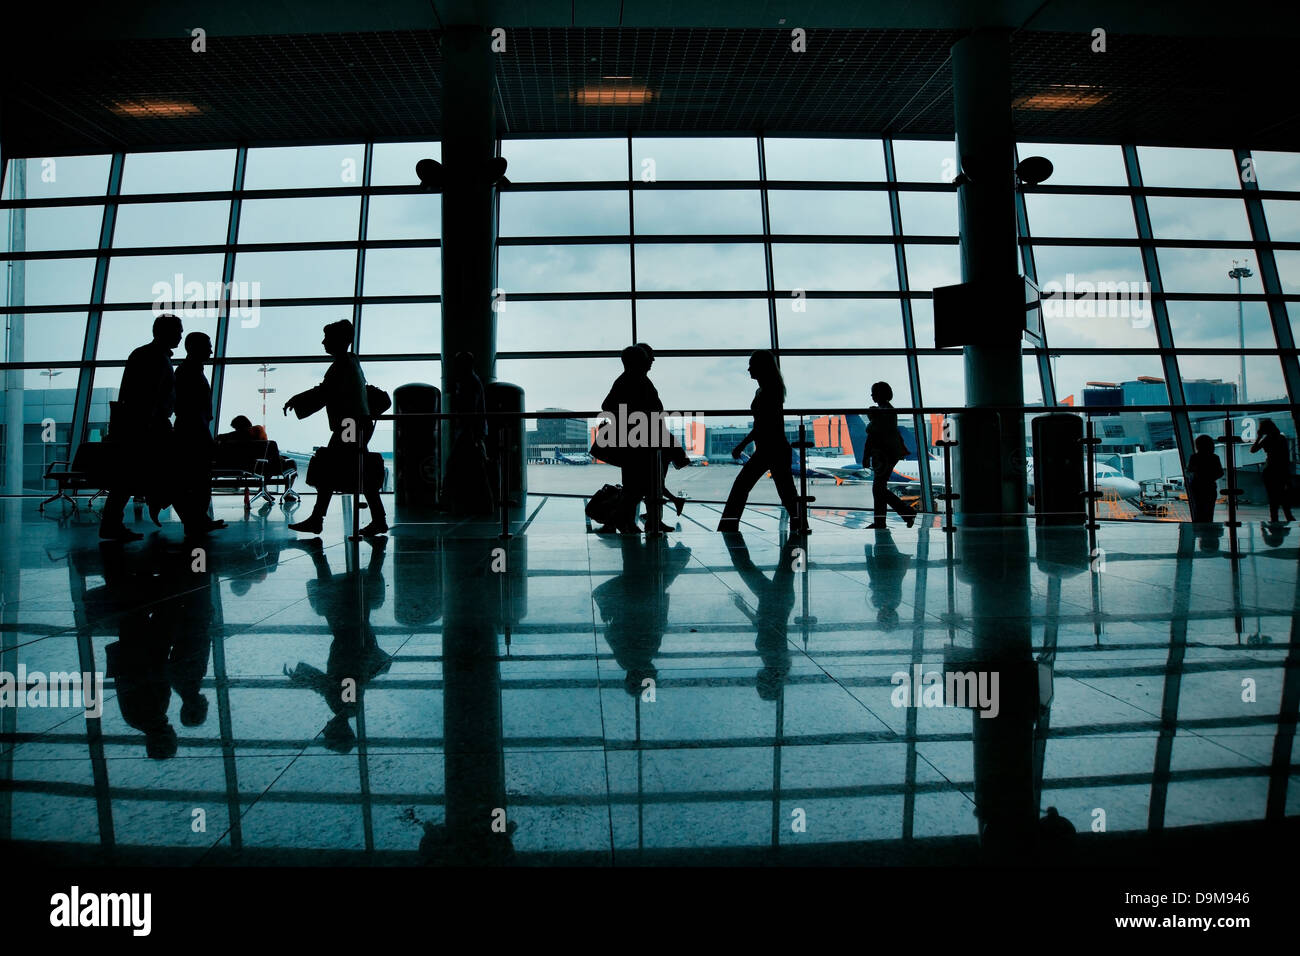 Silhouettes of people with luggage walking at airport Stock Photo